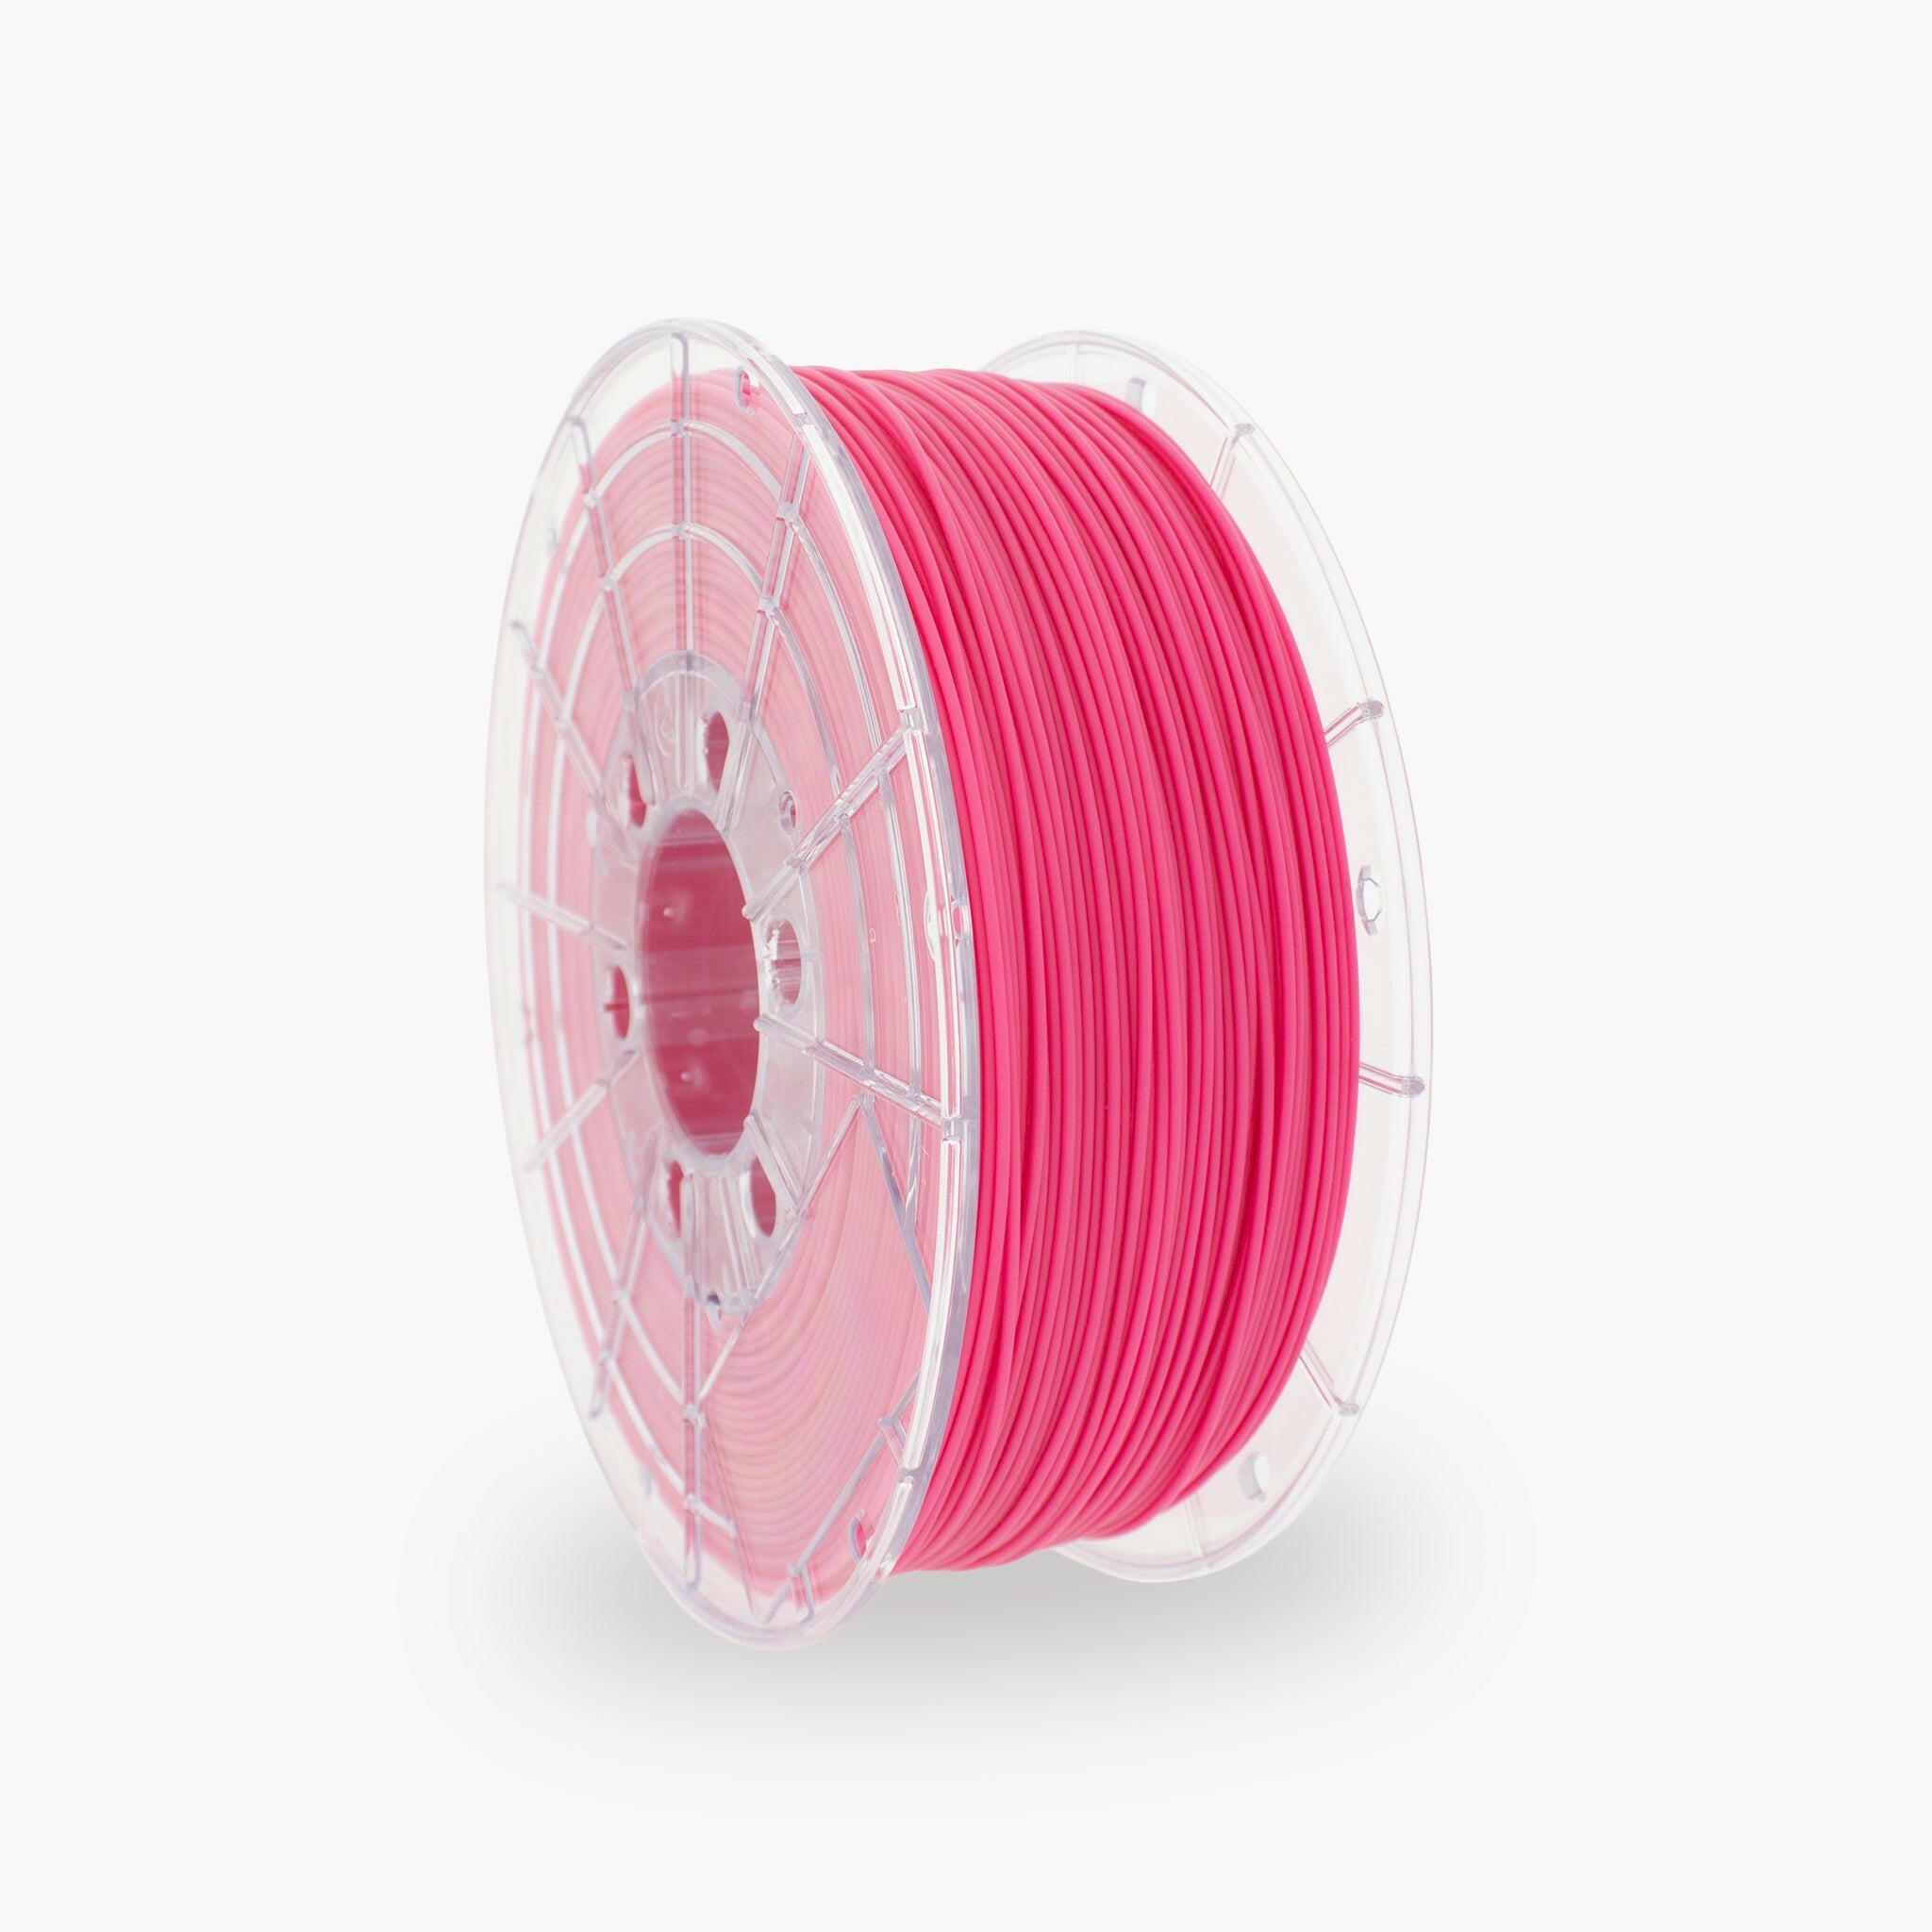 Tele Magenta PLA 3D Printer Filament with a diameter of 1.75mm on a 1KG Spool.